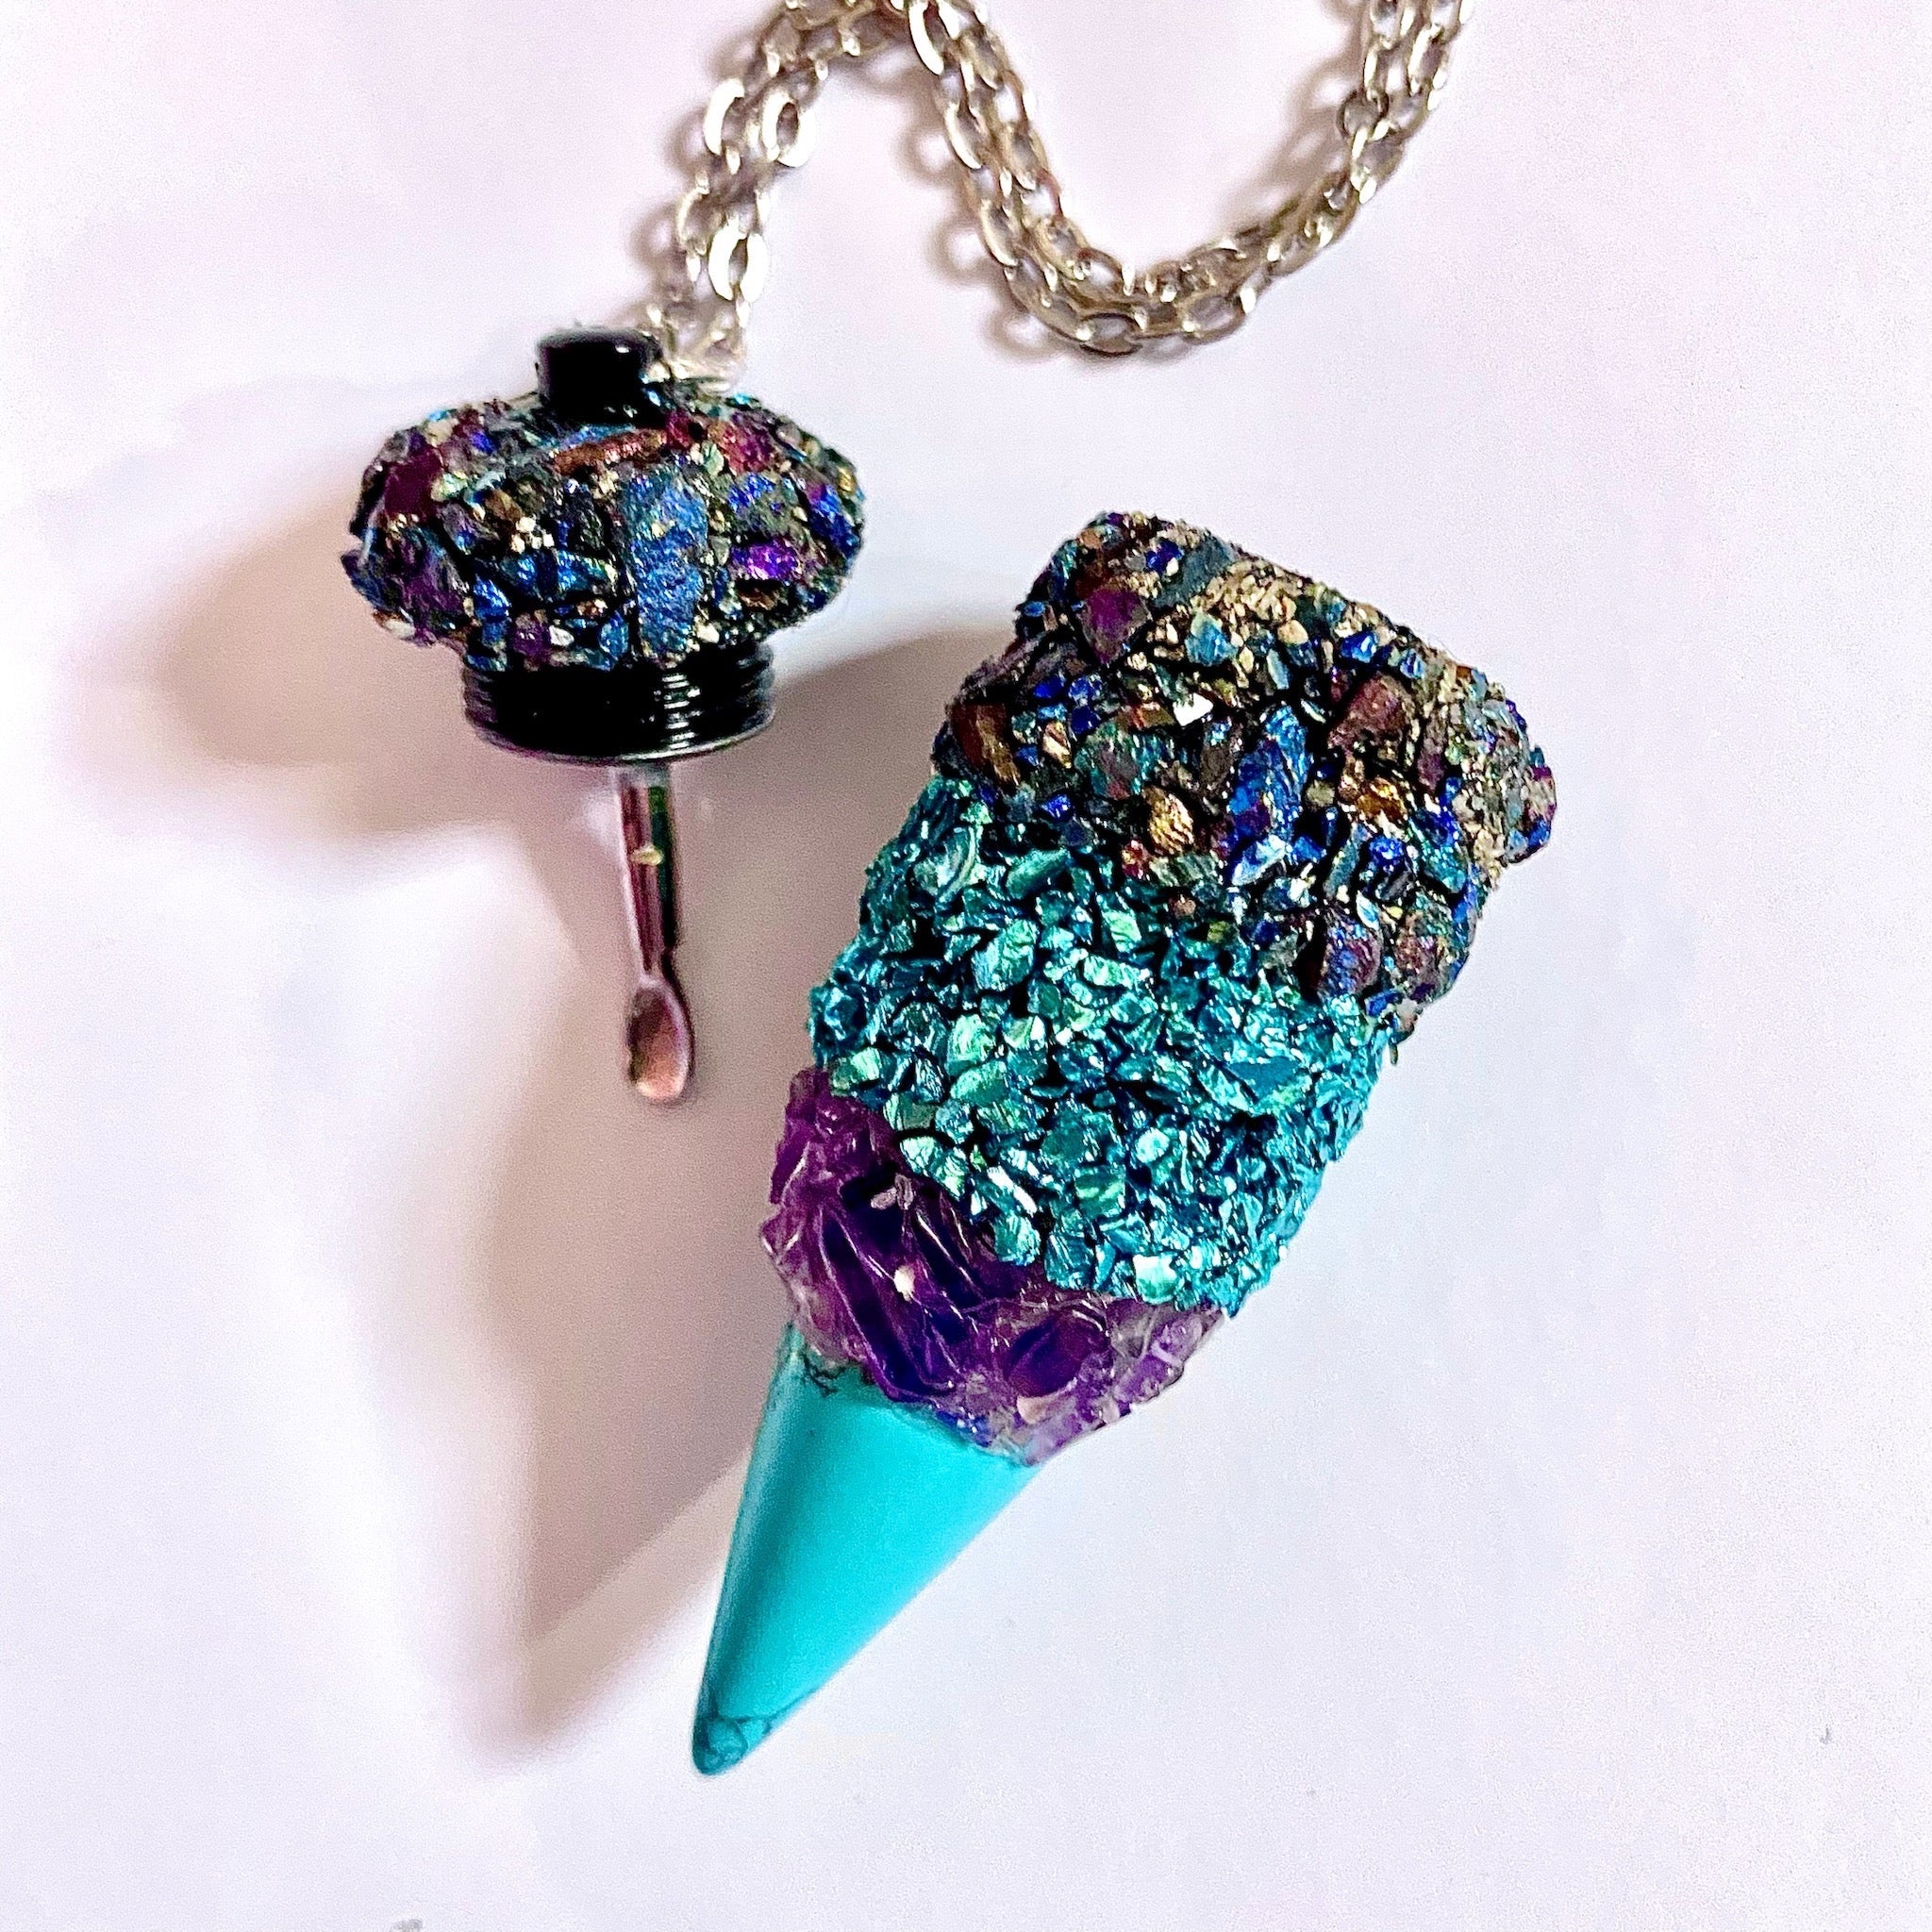 Snuff-Necklace-With-Spoon – Rave Fashion Goddess